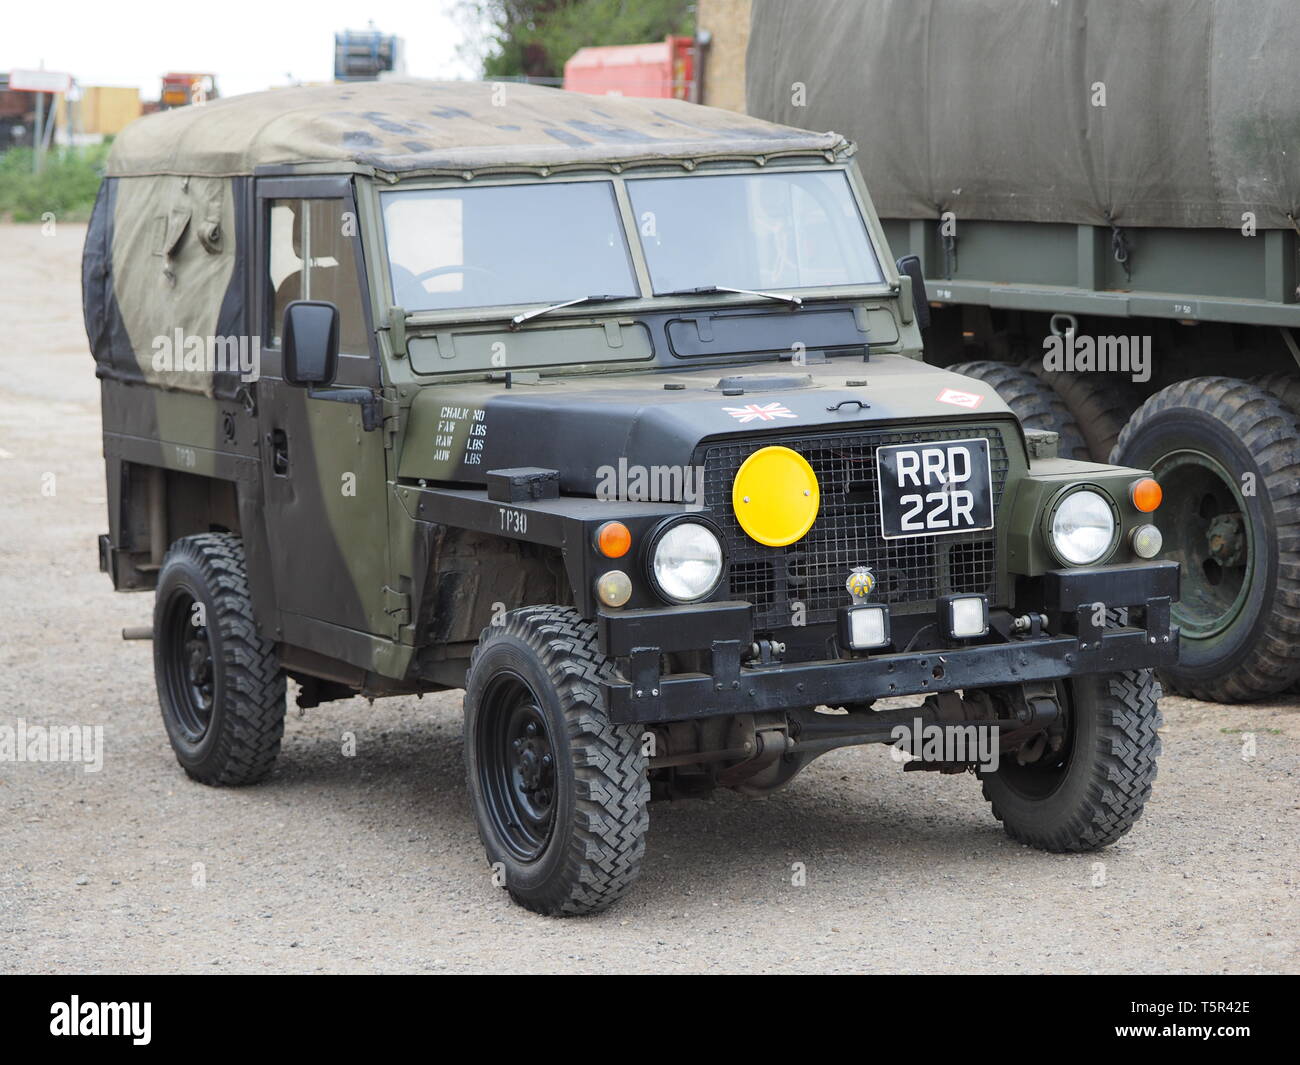 Eastchurch, Kent, UK. 27th April, 2019. Invicta Military Vehicle Preservation Society put on a display of vehicles at the Aviation Museum in Eastchurch, Kent today. Pic: a 1977 petrol army / military Land Rover. Credit: James Bell/Alamy Live News Stock Photo